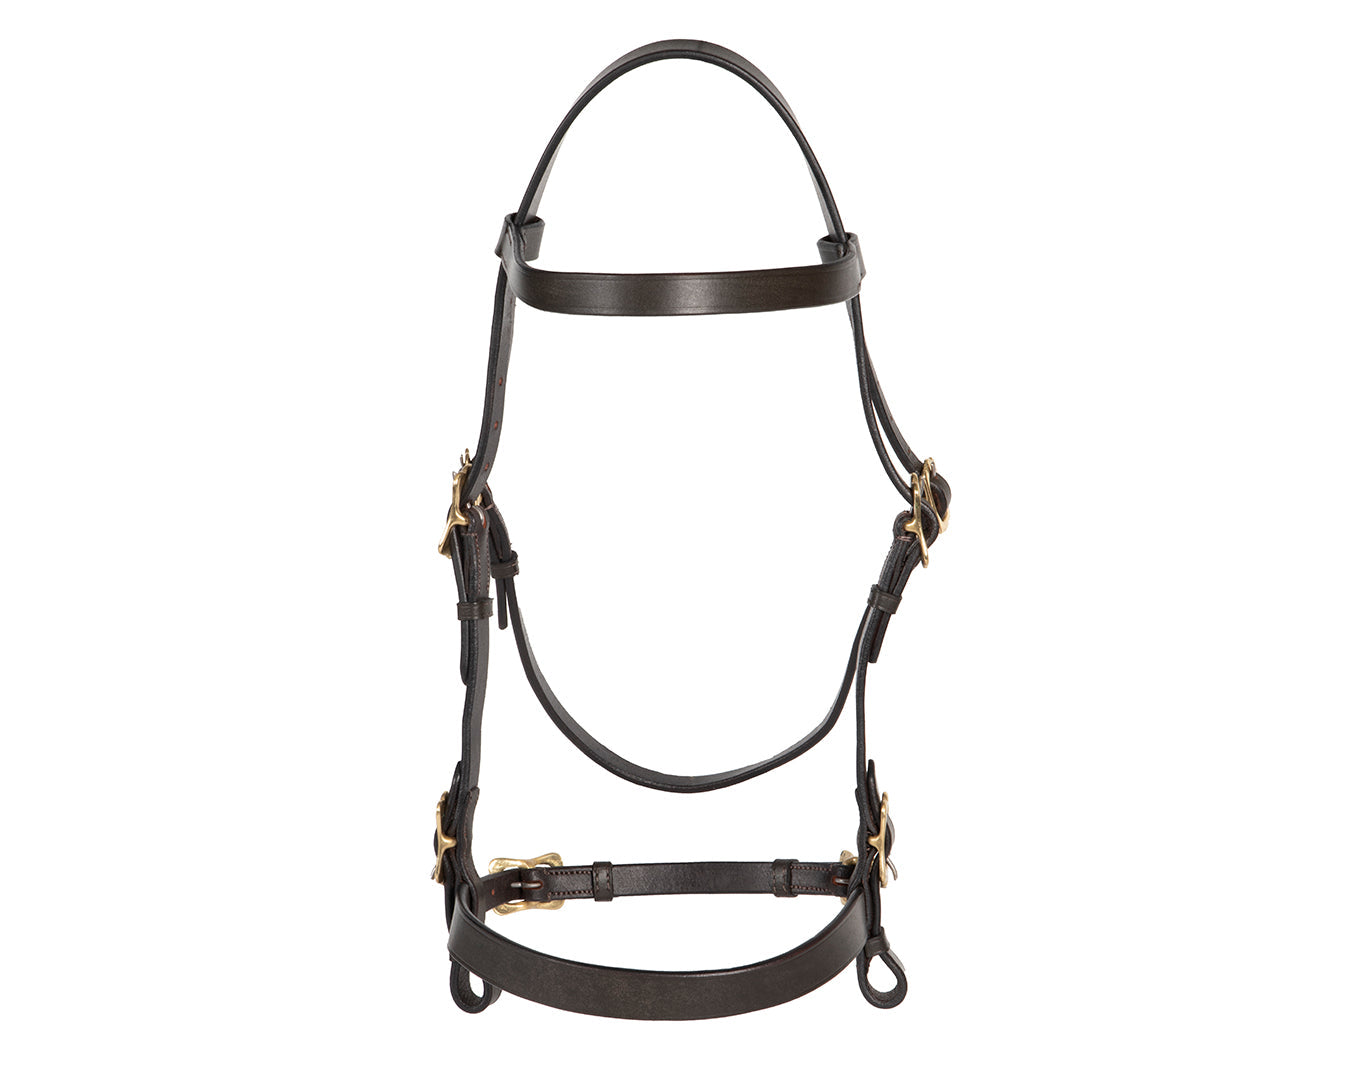 Jeremy & Lord In-Hand Flat Show Bridle